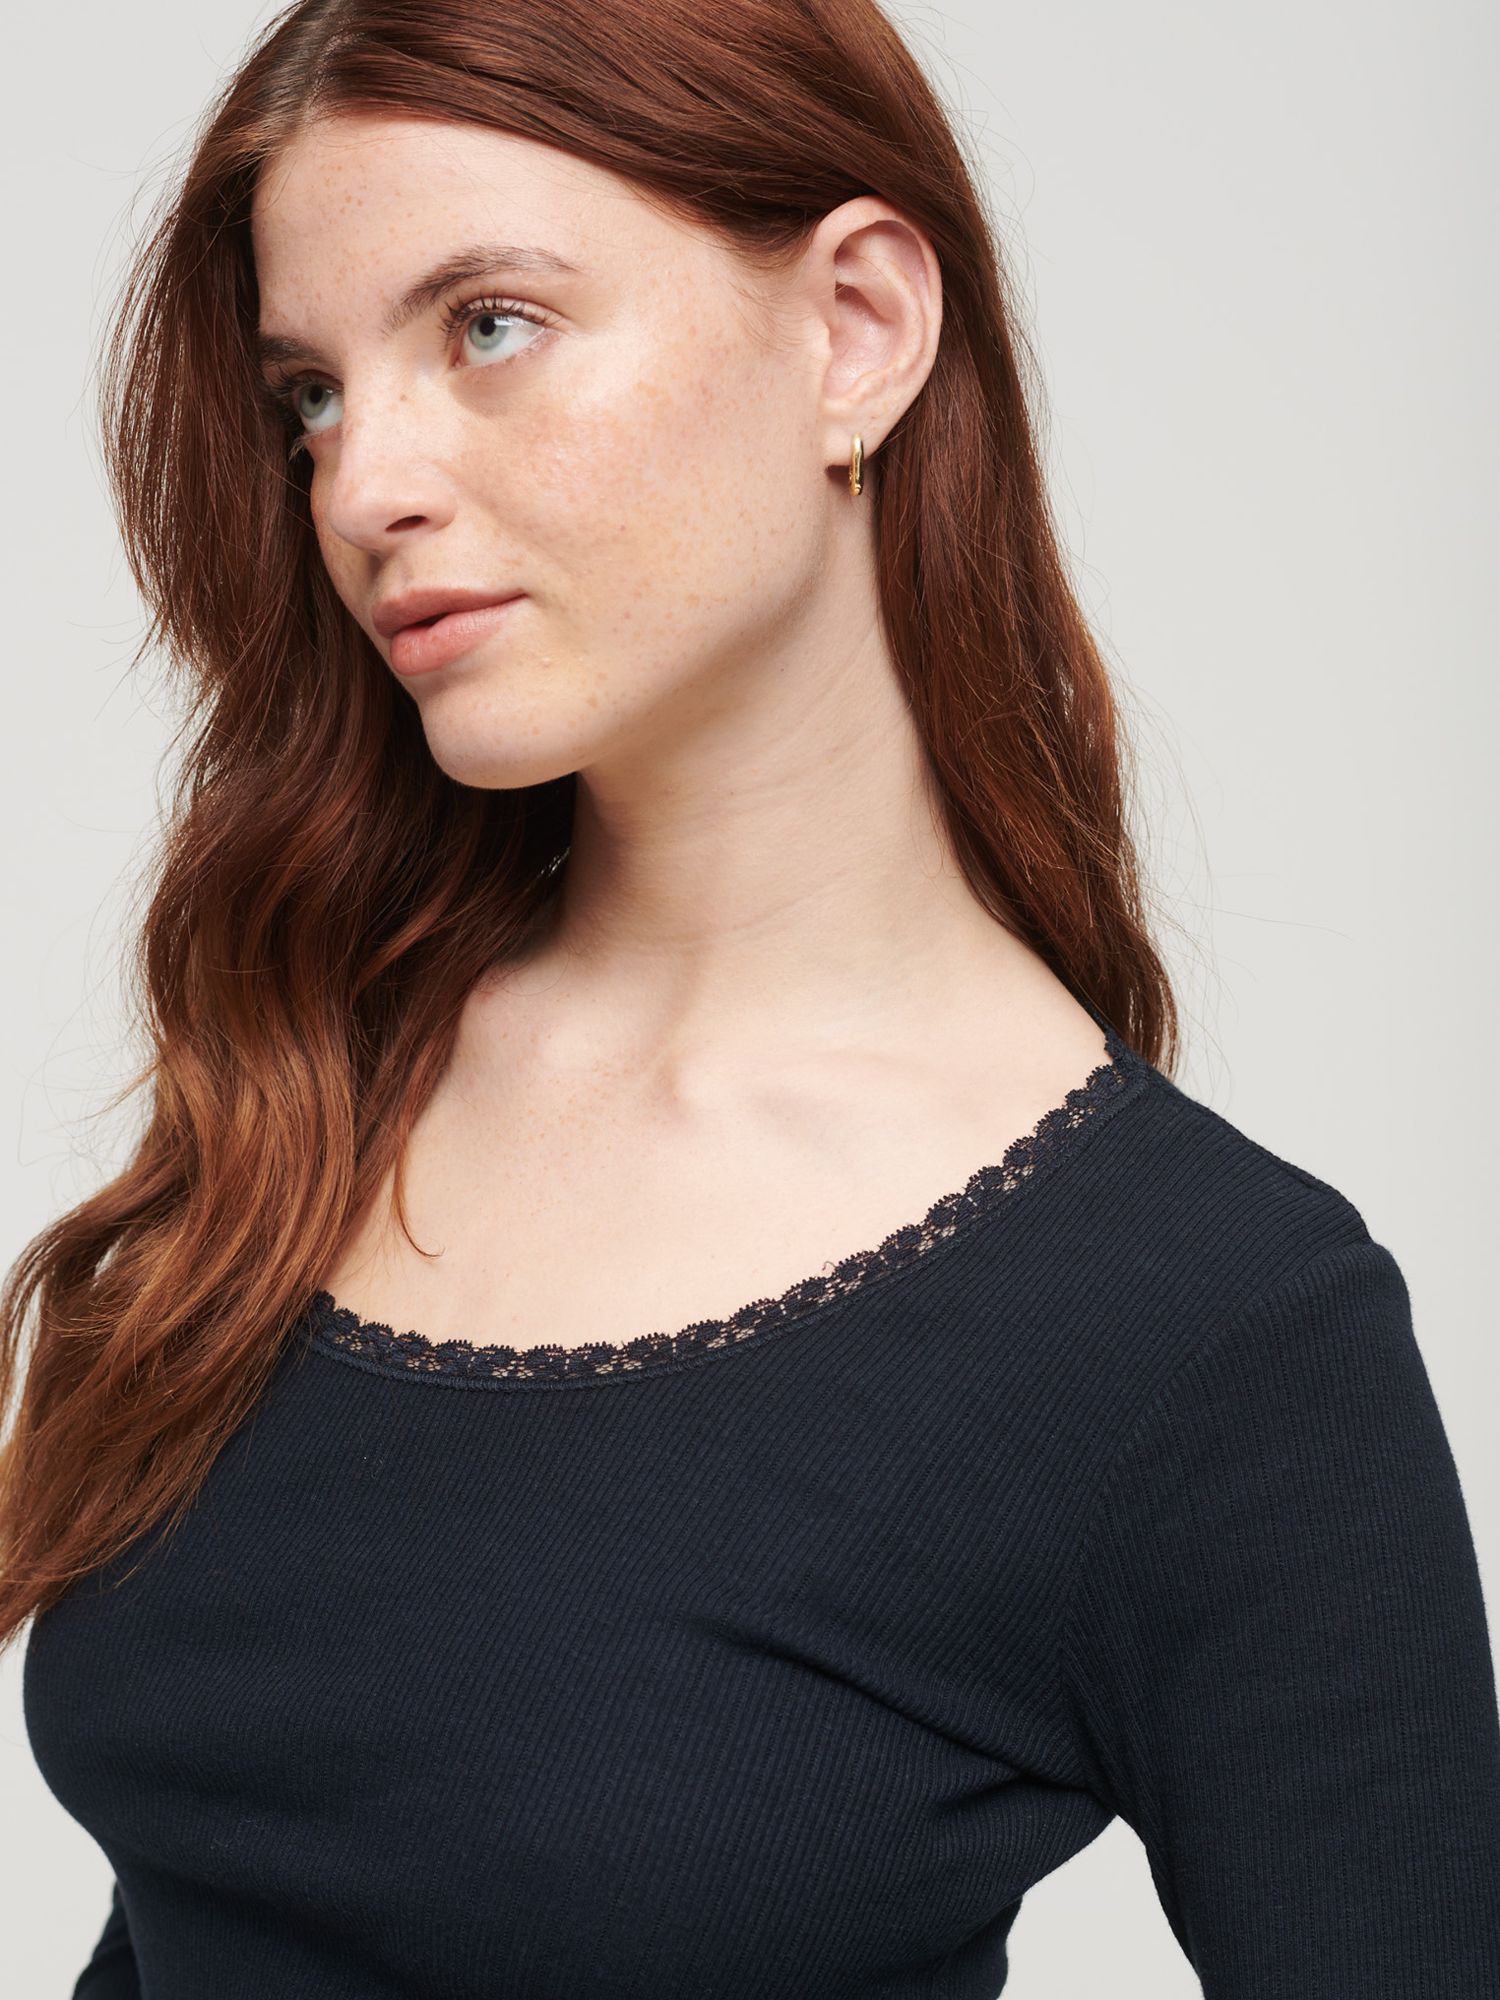 Buy Superdry Essential Long Sleeve Rib Lace Top Online at johnlewis.com